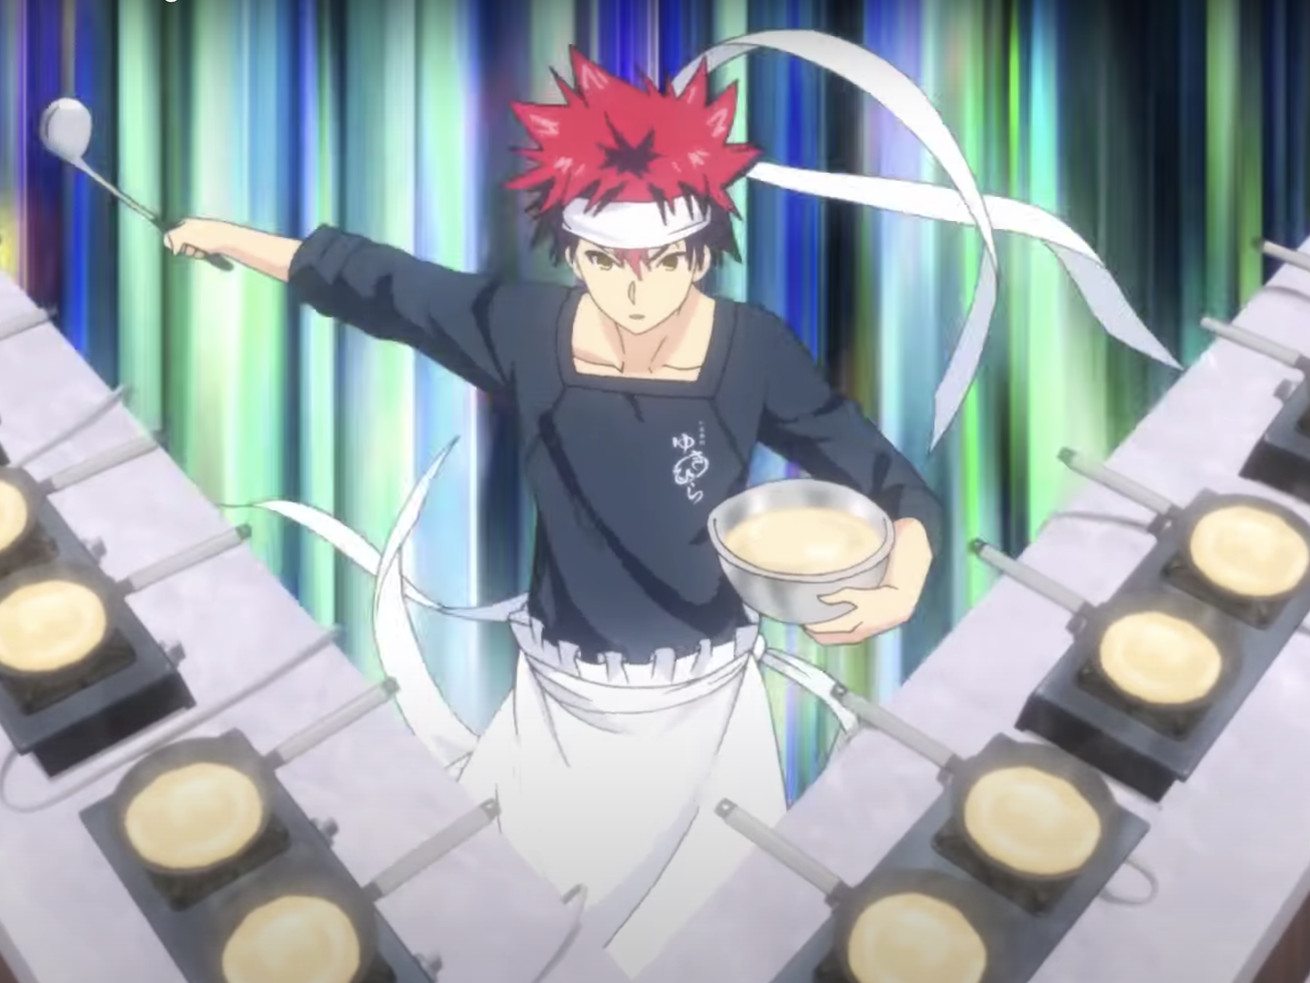 An anime character with red hair making omlettes